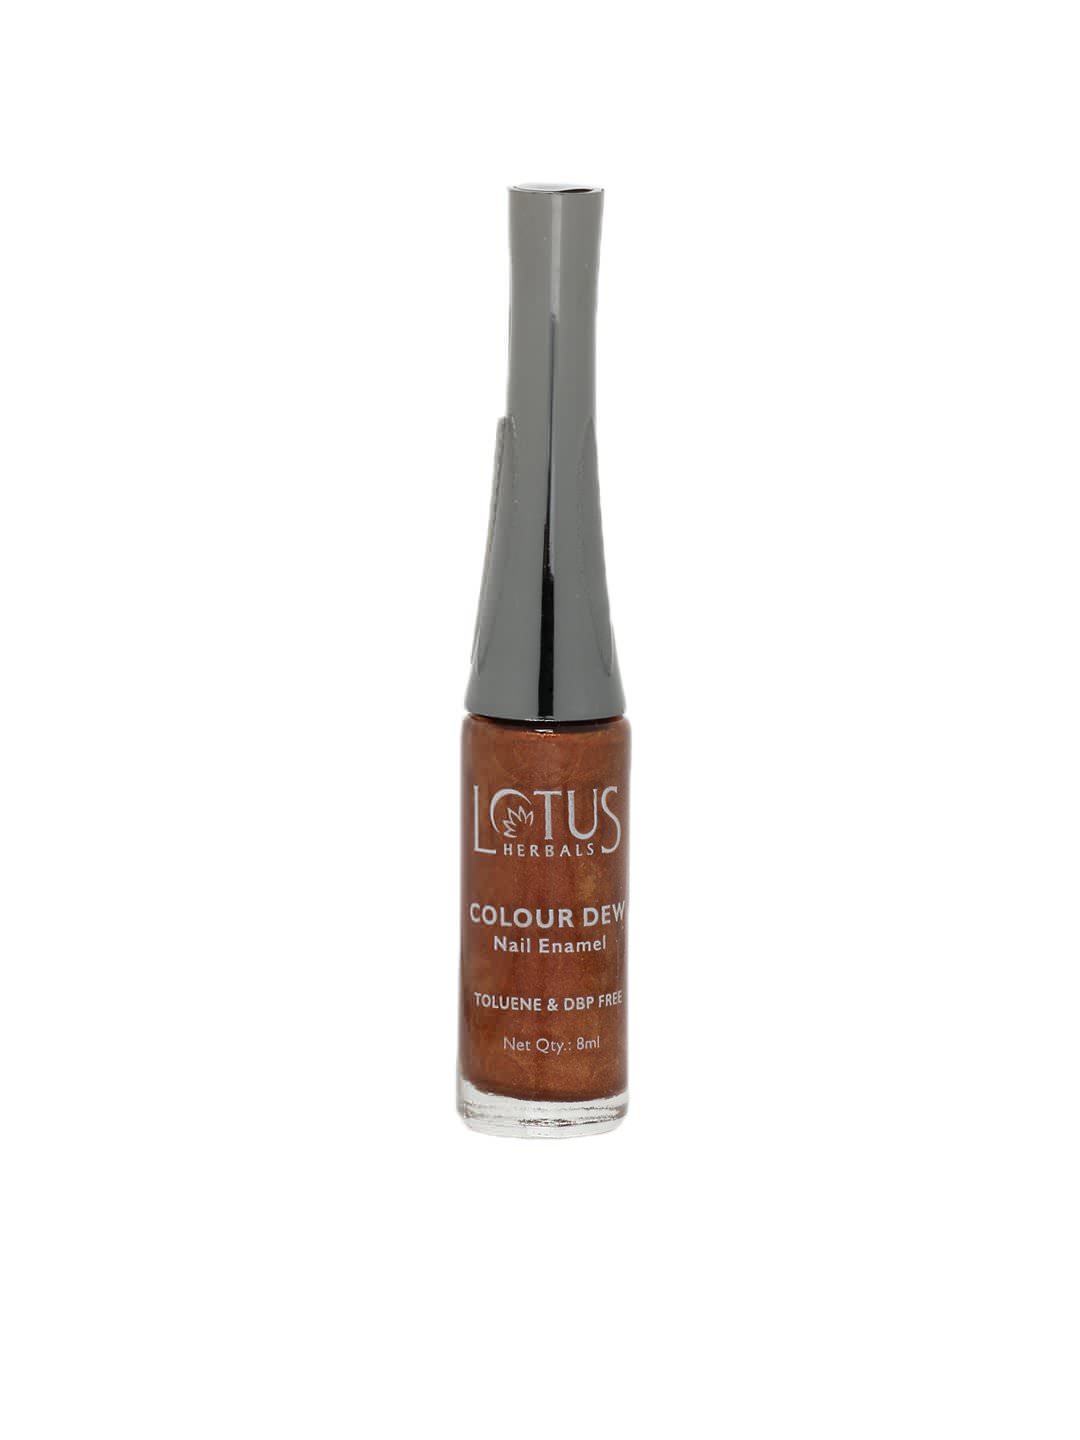 Lotus Herbals Colour Dew Nutty Love Nail Polish 97